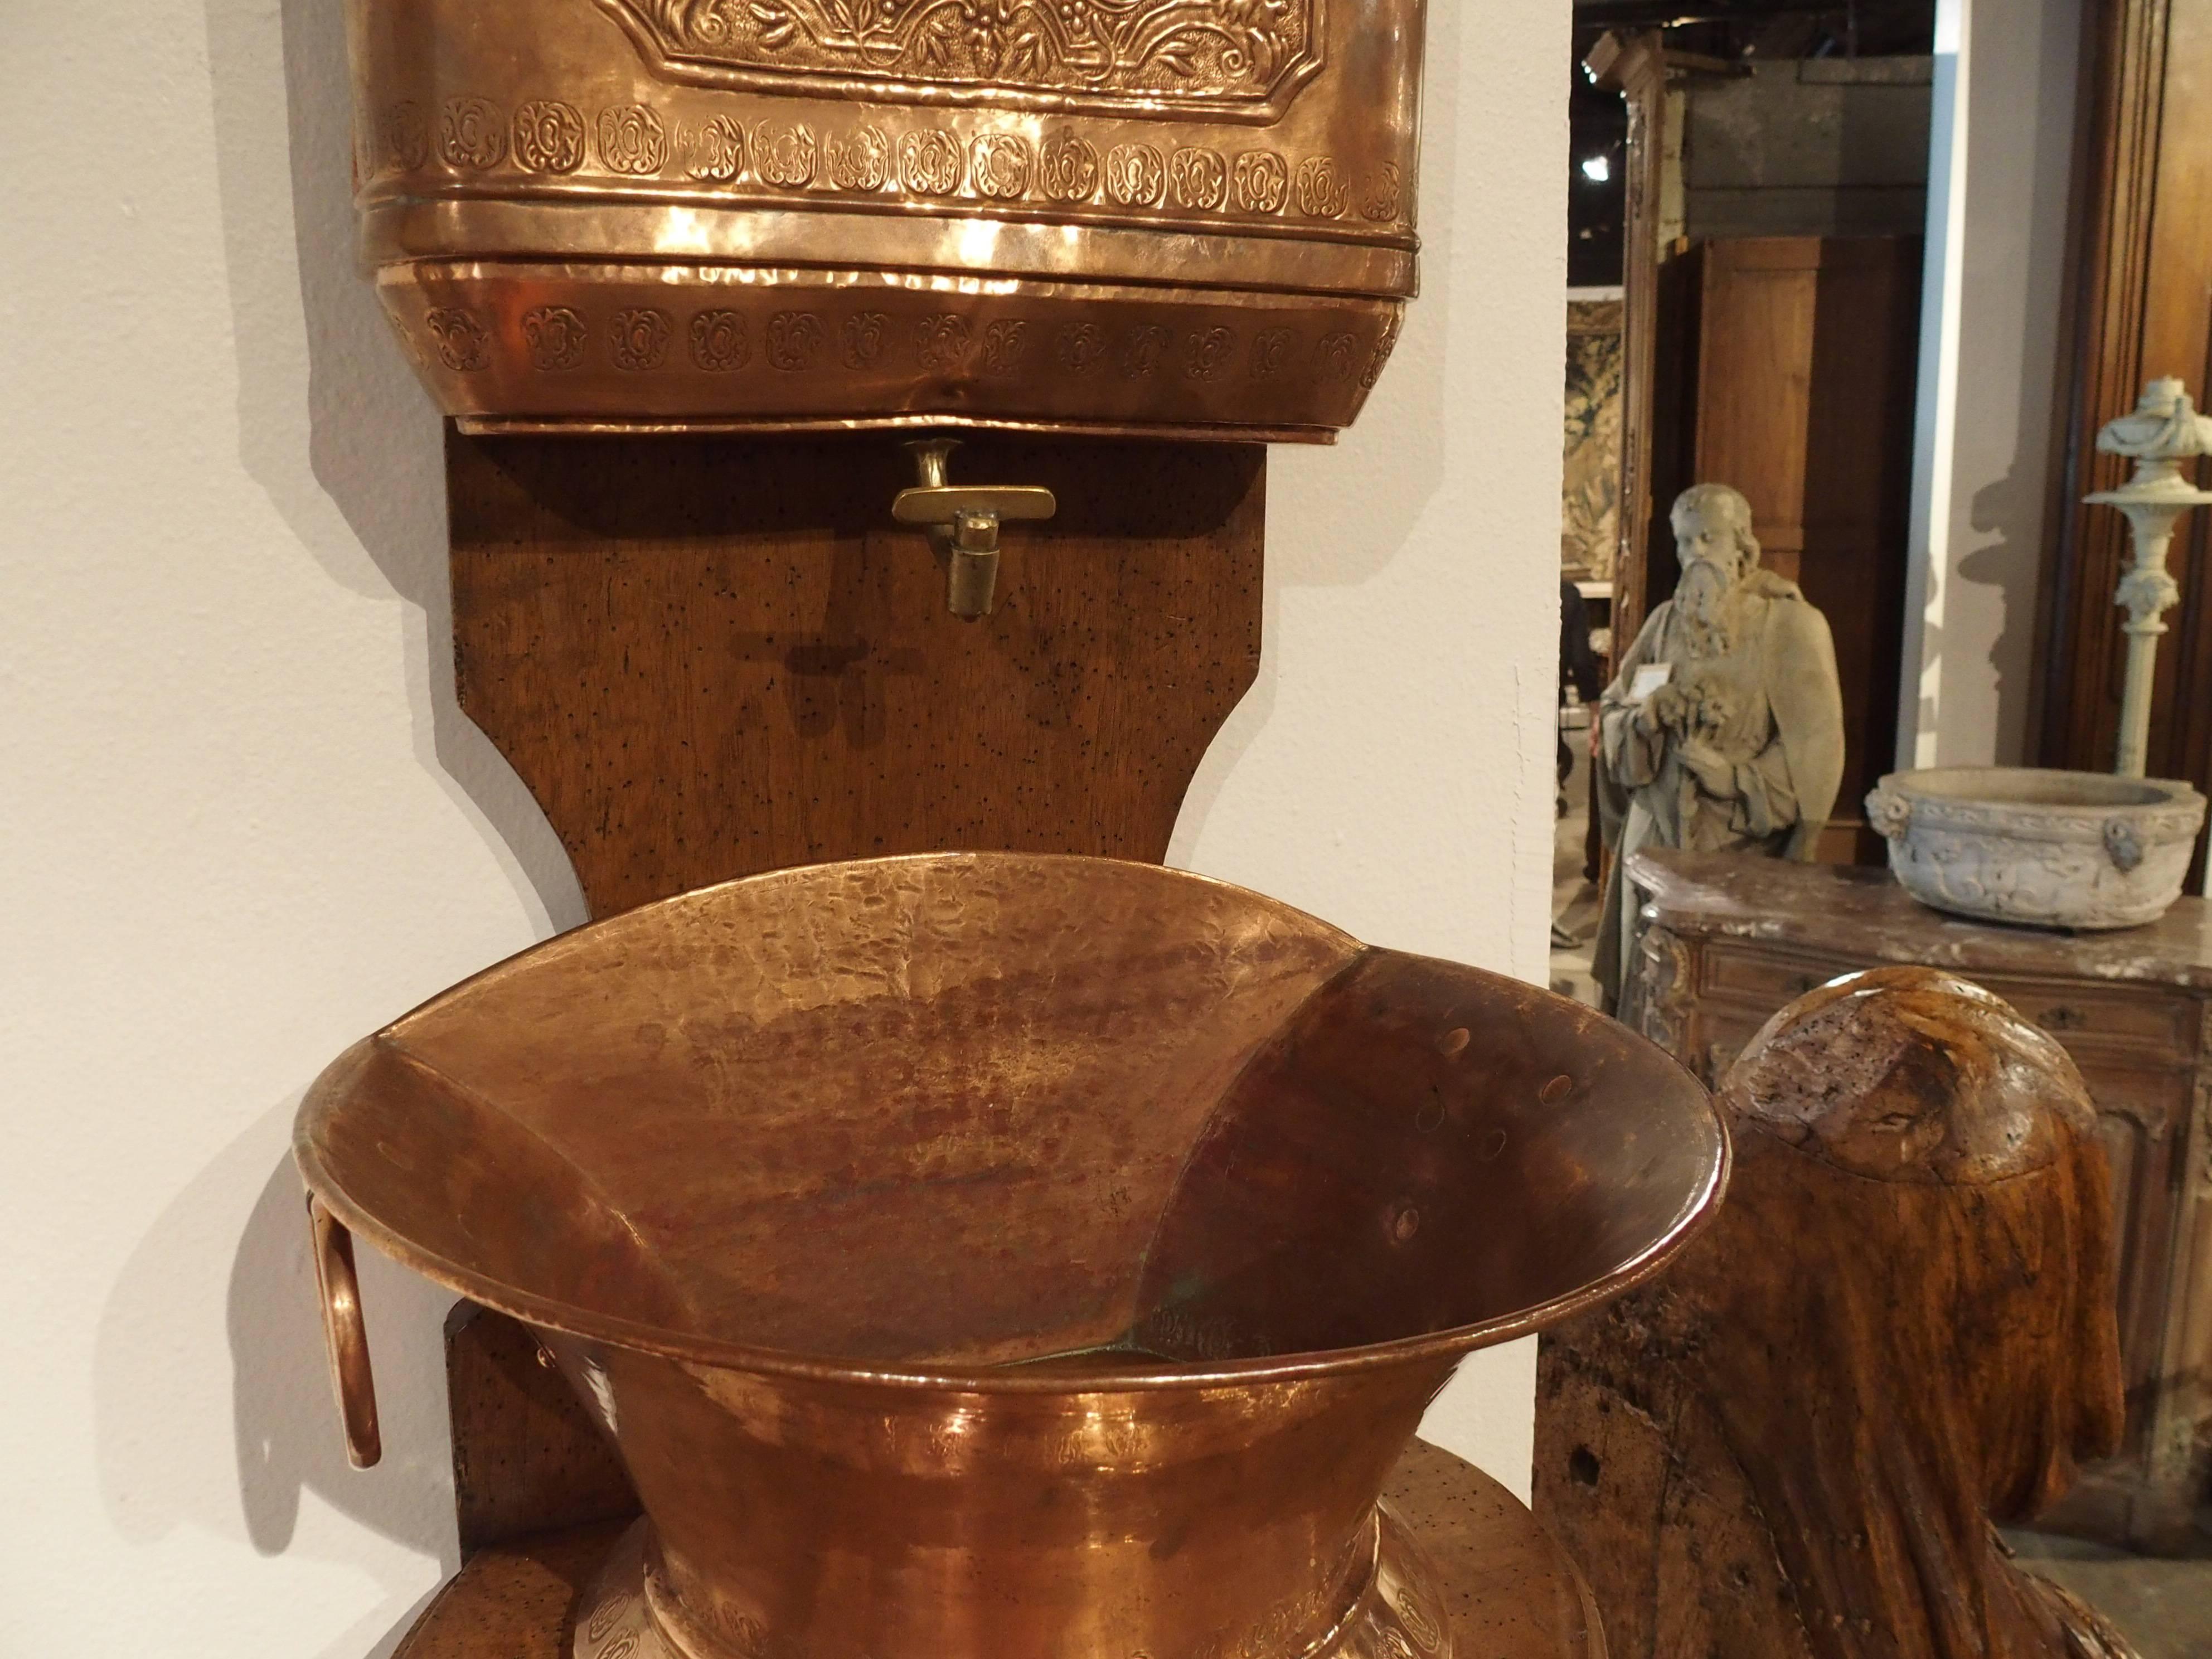 This 19th century French repousse copper lavabo on an original walnut wood Stand has a coat of arms on the front of the upper storage tank where the water is held. A bronze spigot would have allowed the water to empty into the bottom basin by